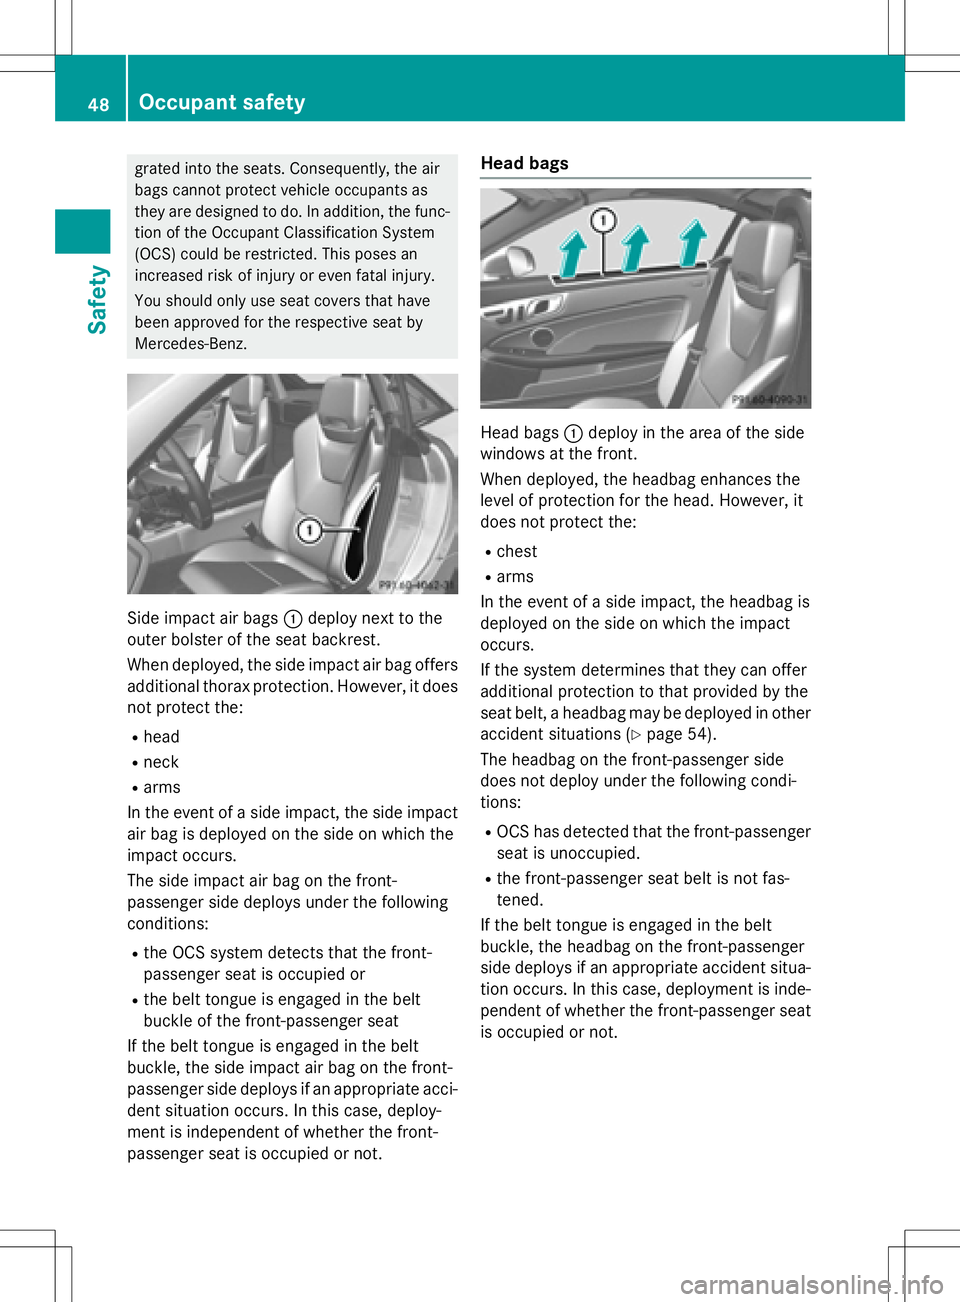 MERCEDES-BENZ SLK-CLASS ROADSTER 2016  Owners Manual grated into the seats. Consequently, the air
bags cannot protect vehicle occupants as
they are designed to do. In addition, the func-tion of the Occupant Classification System
(OCS) could be restricte